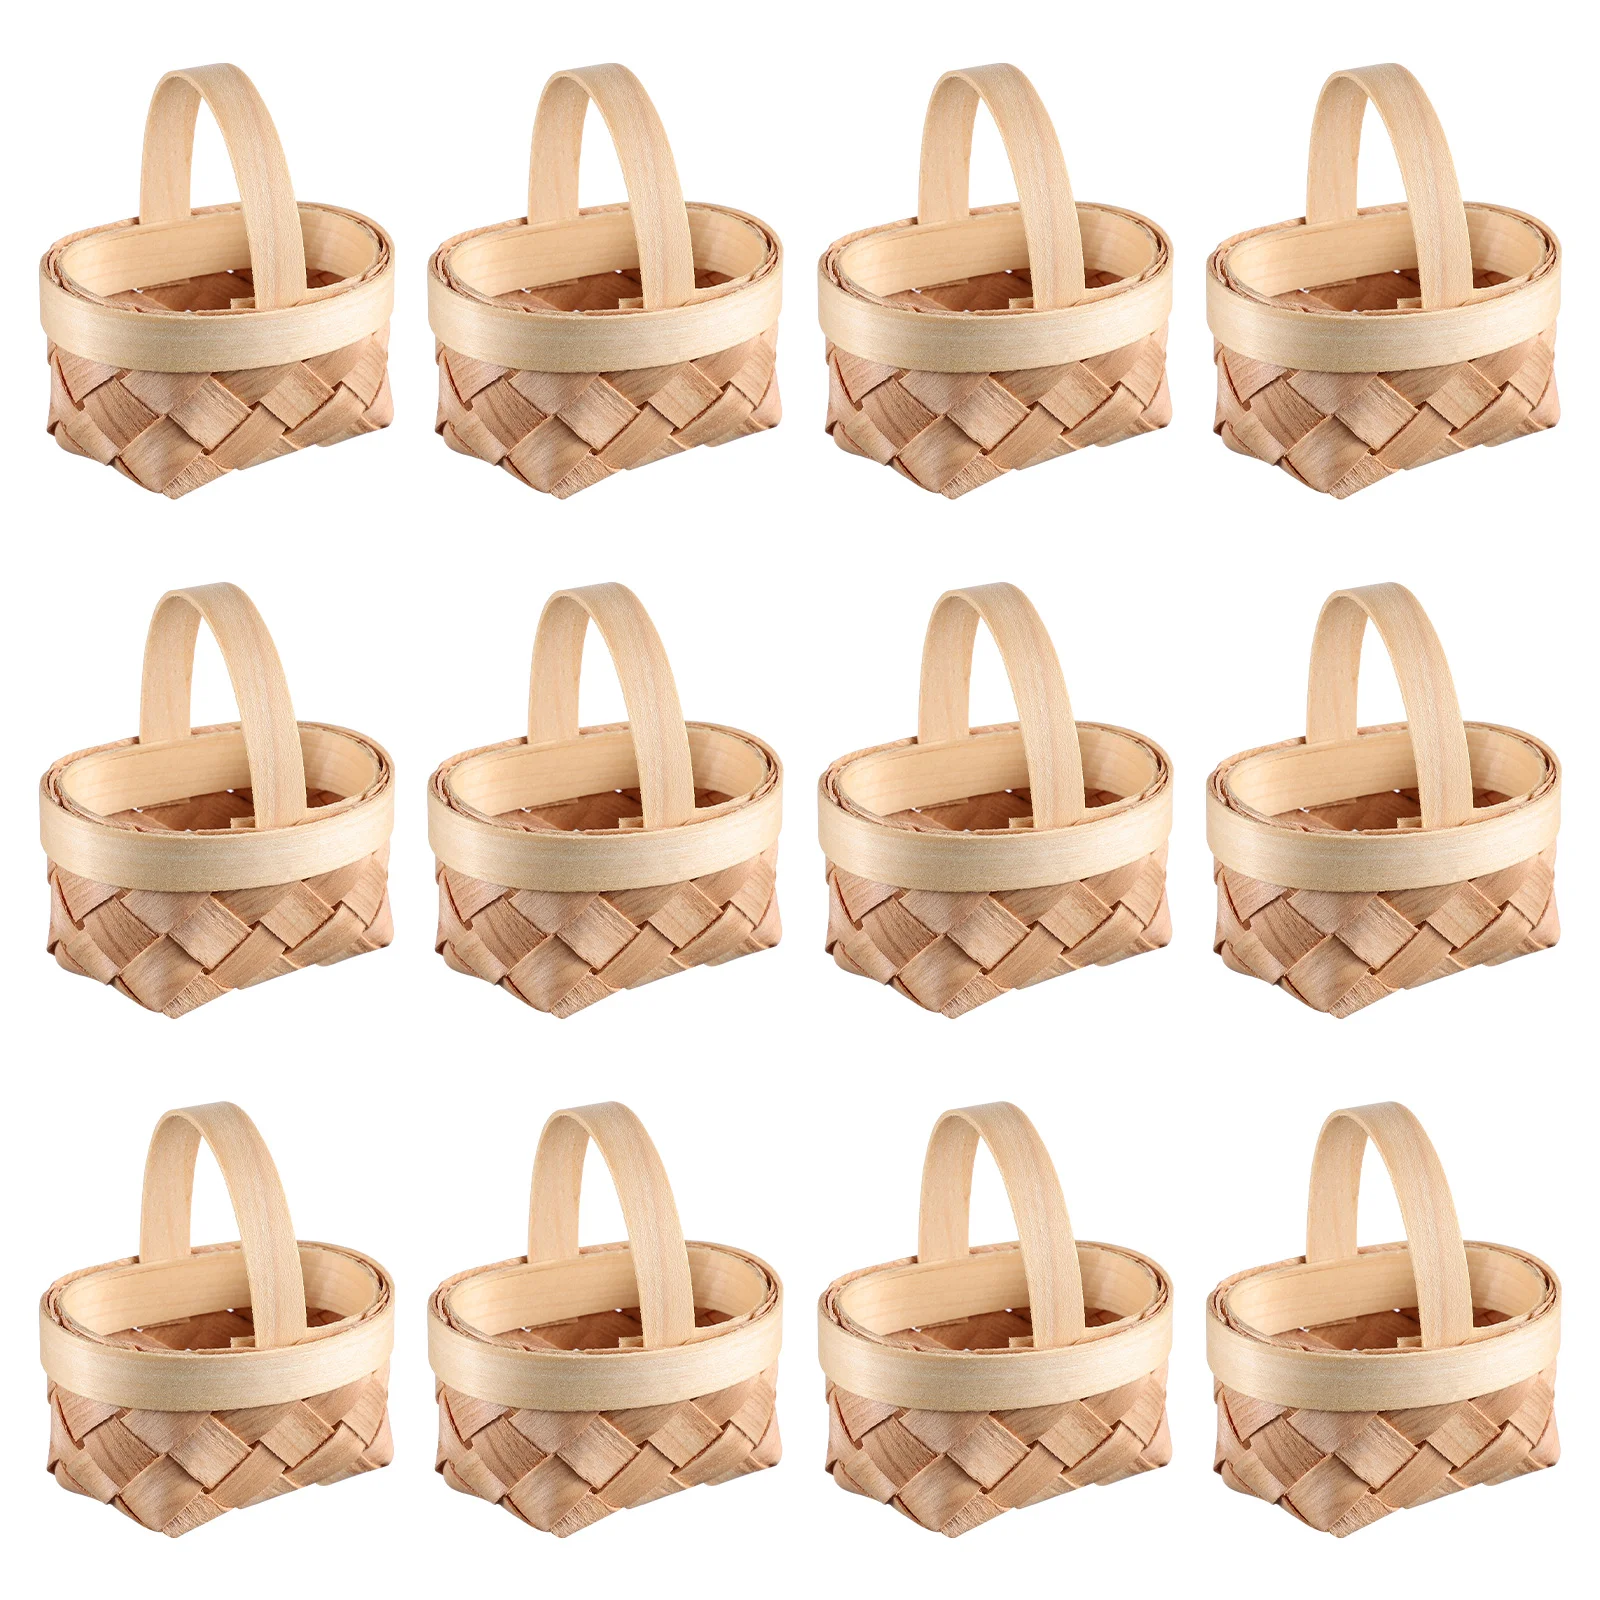 

Baskets Mini Basket Woven Wicker Miniature Party Wooden Favors Picnic Crafts Wood Gift Tiny Handle Candy Chip Hanging Easter